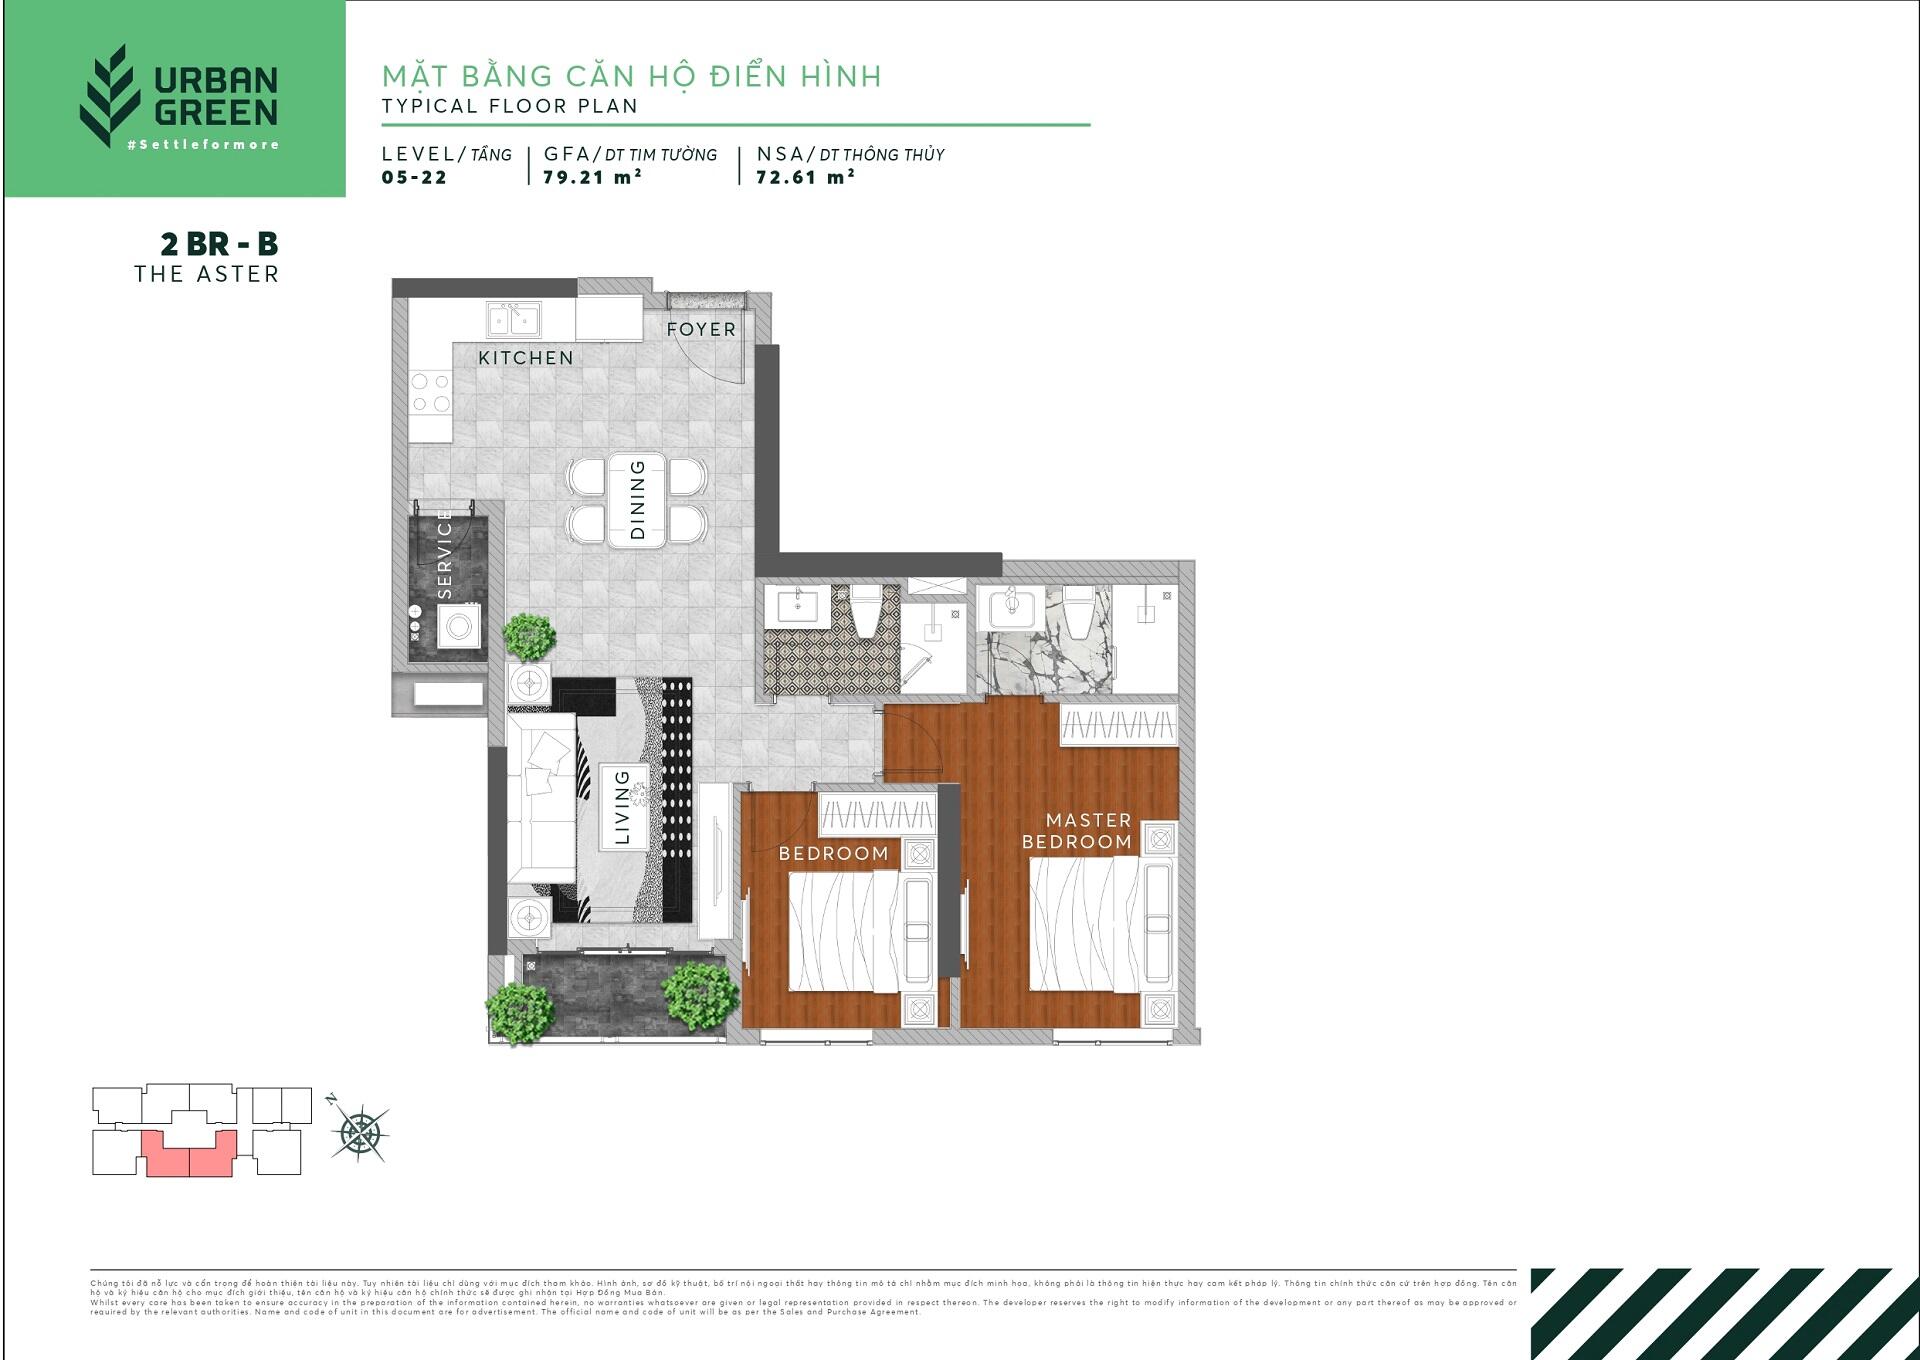 The layout of 2 bedroom 2BR apartment - B